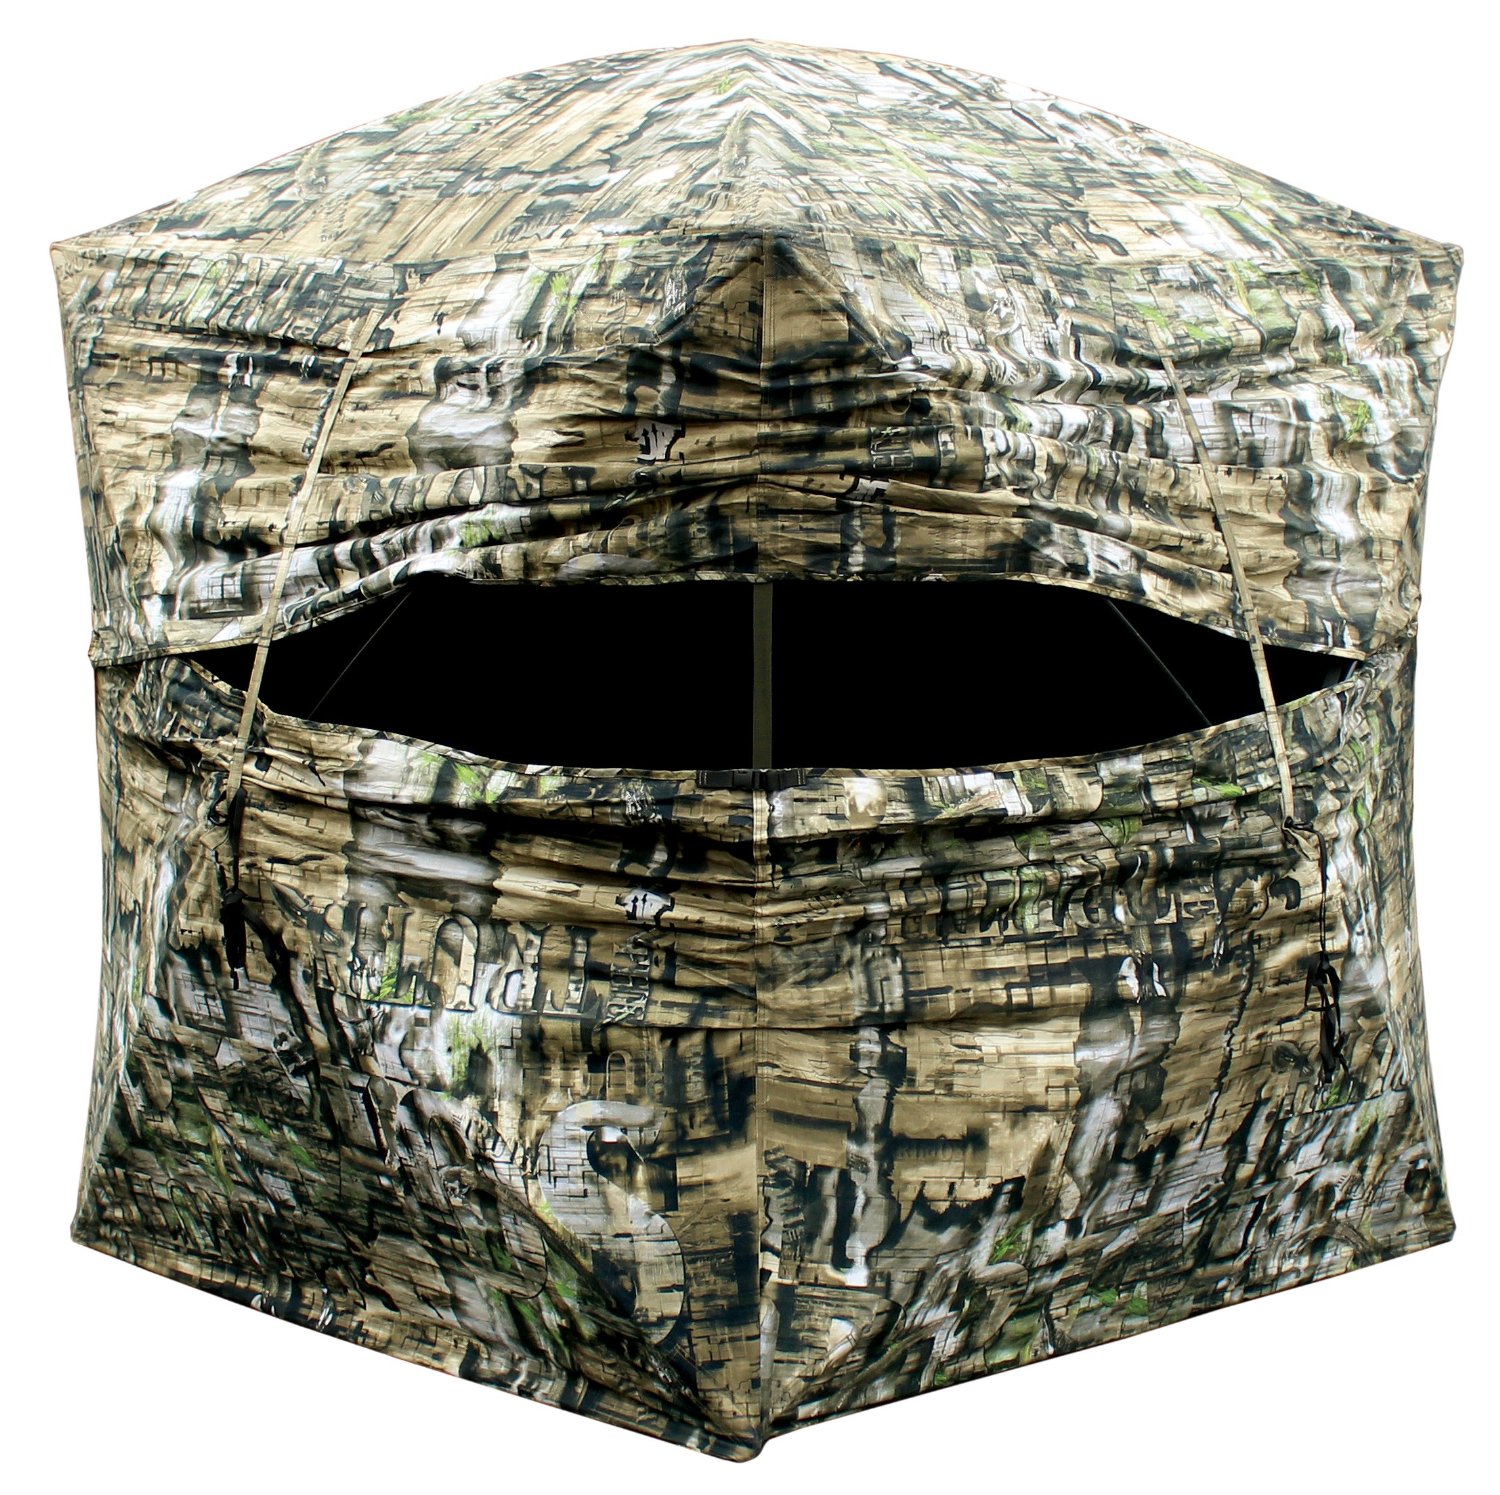 Primos Double Bull Deluxe Ground Blind, Truth Camo - $339.99 shipped (LD) (Free S/H over $25)